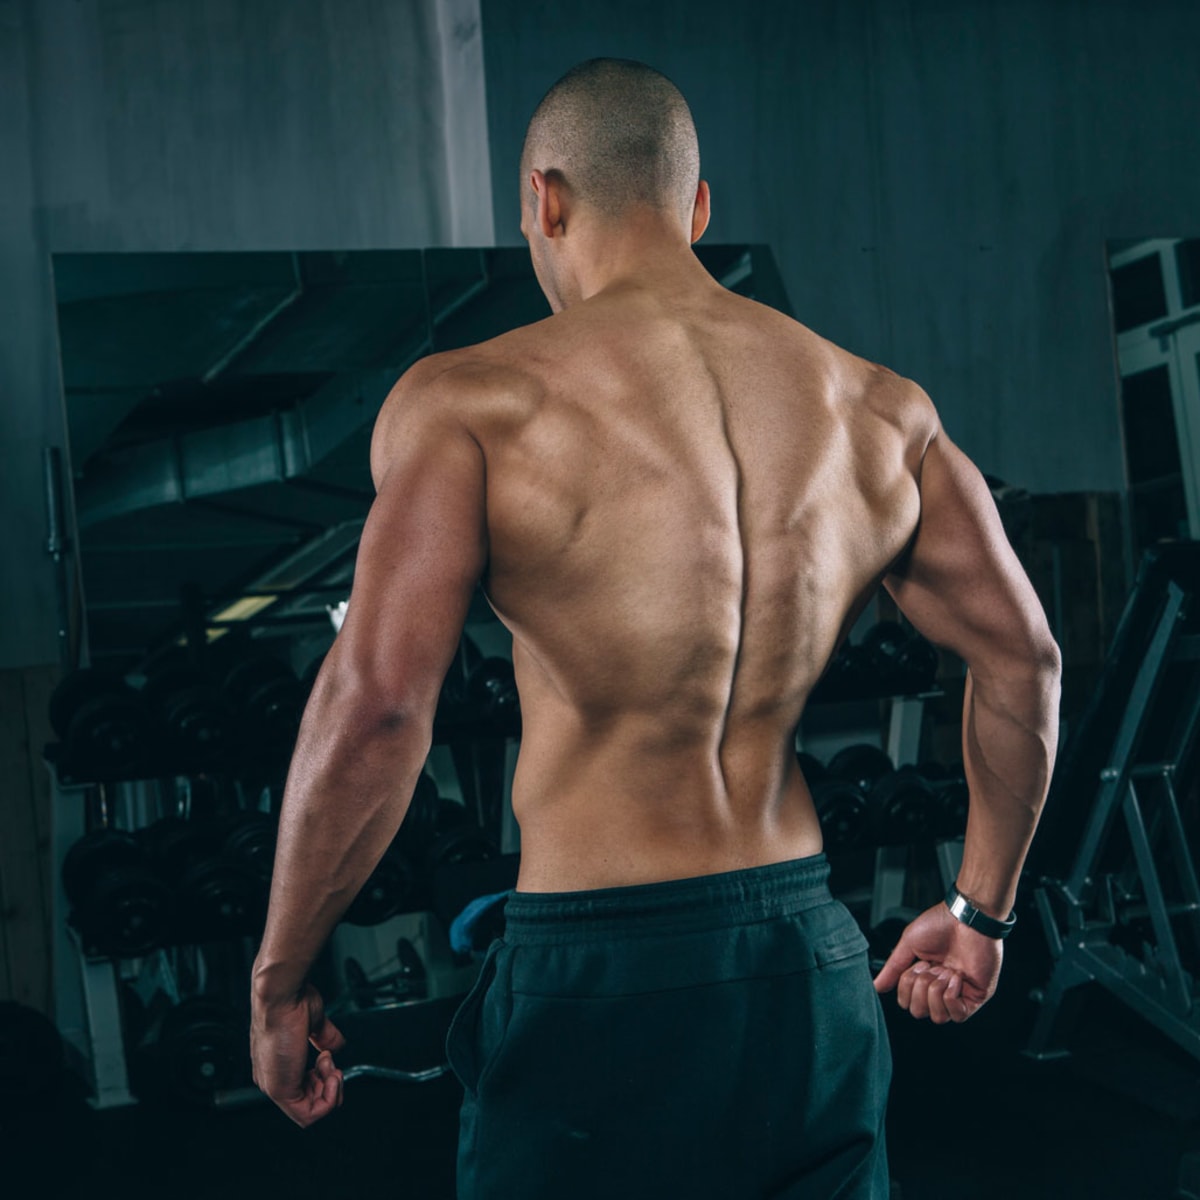 4 Exercises That Will Widen Your Back Muscles - Men's Journal